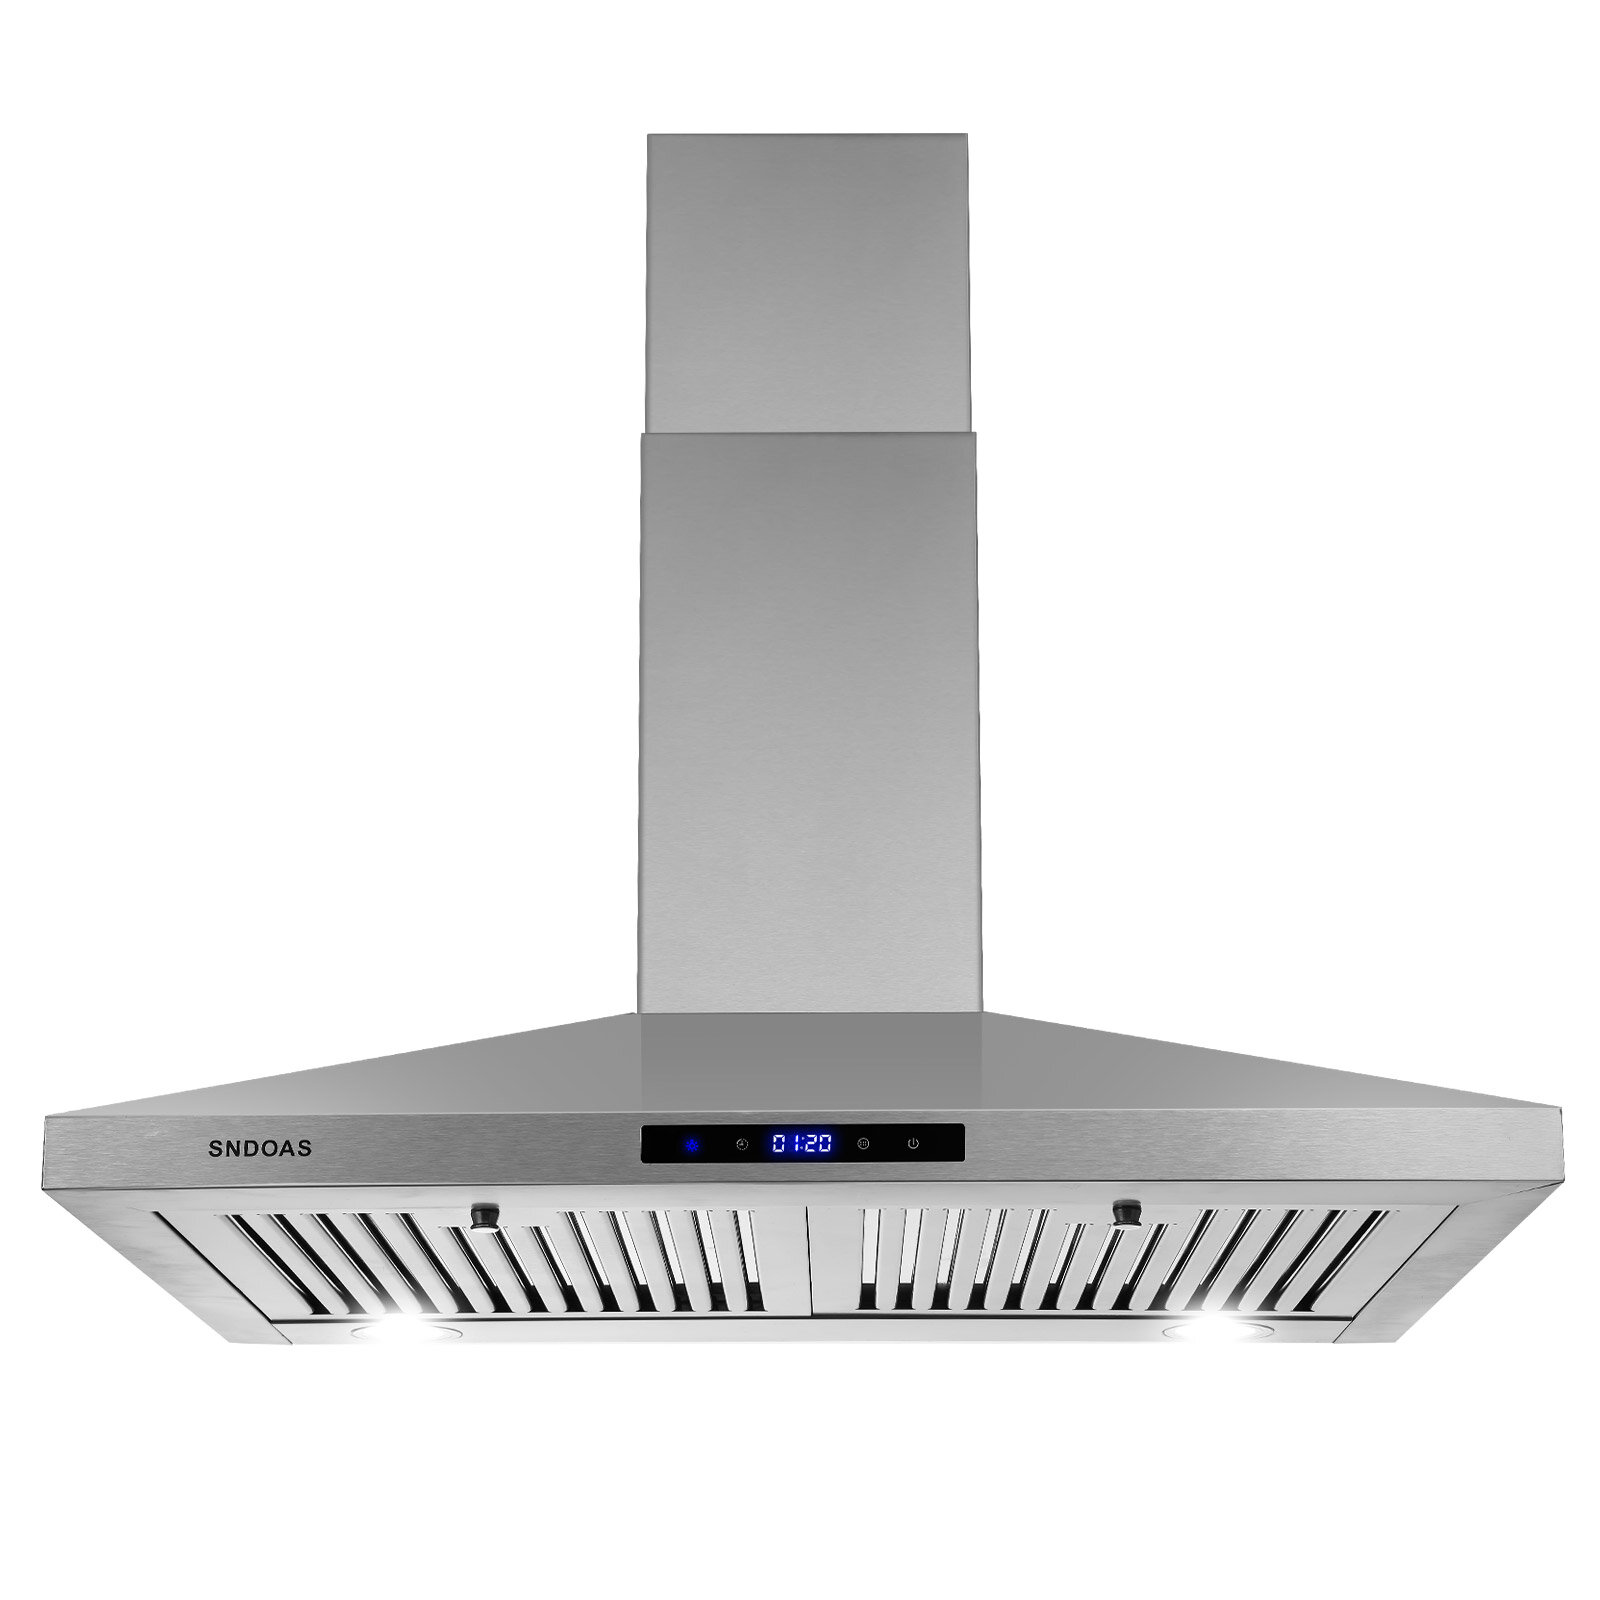  SNDOAS Black Range Hood 24 inch,Black Vent Hood,Stainless Steel  Chimney-Style 24 inch Range Hood,Ductless Range Hood with 3-Speed Exhaust  Fan,LED Light,Wall Mount Kitchen Hood,Over Stove Vent : Appliances